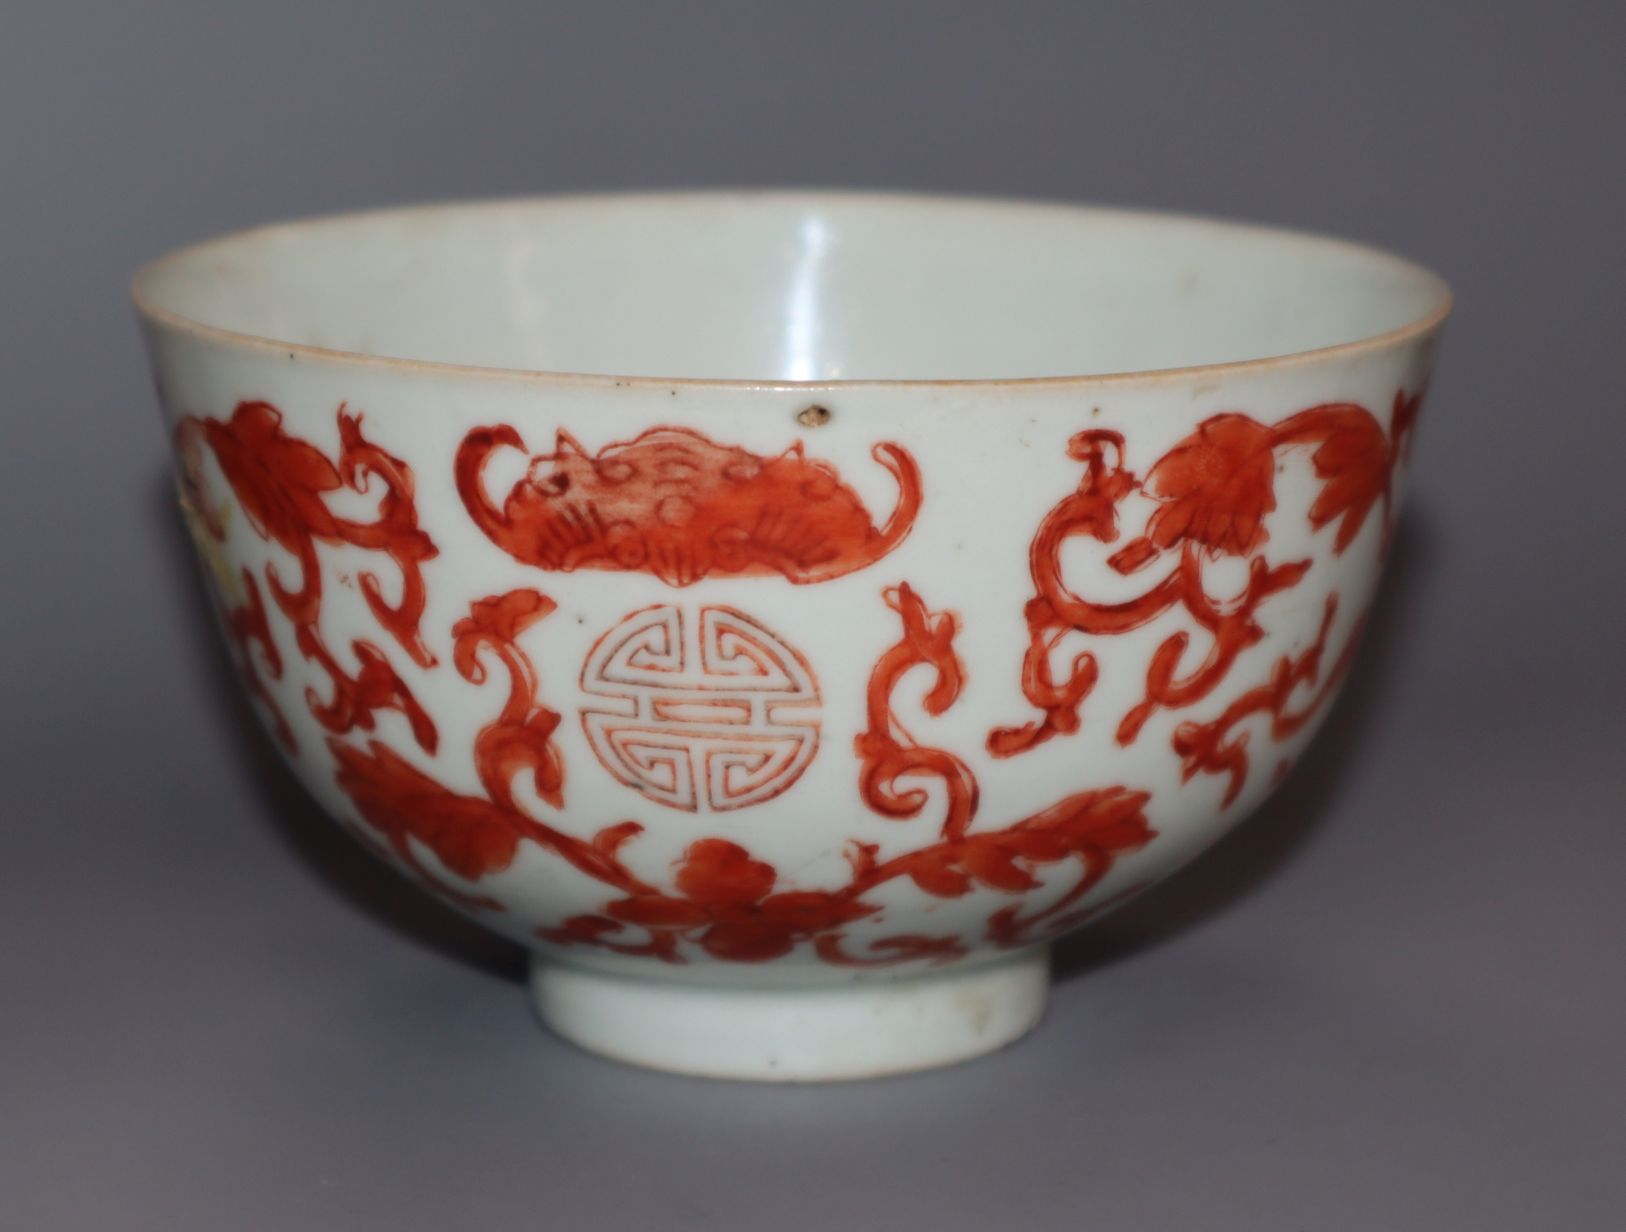 A Chinese copper travelling case for a Tongzhi porcelain bowlProvenance - The Pestalozzi